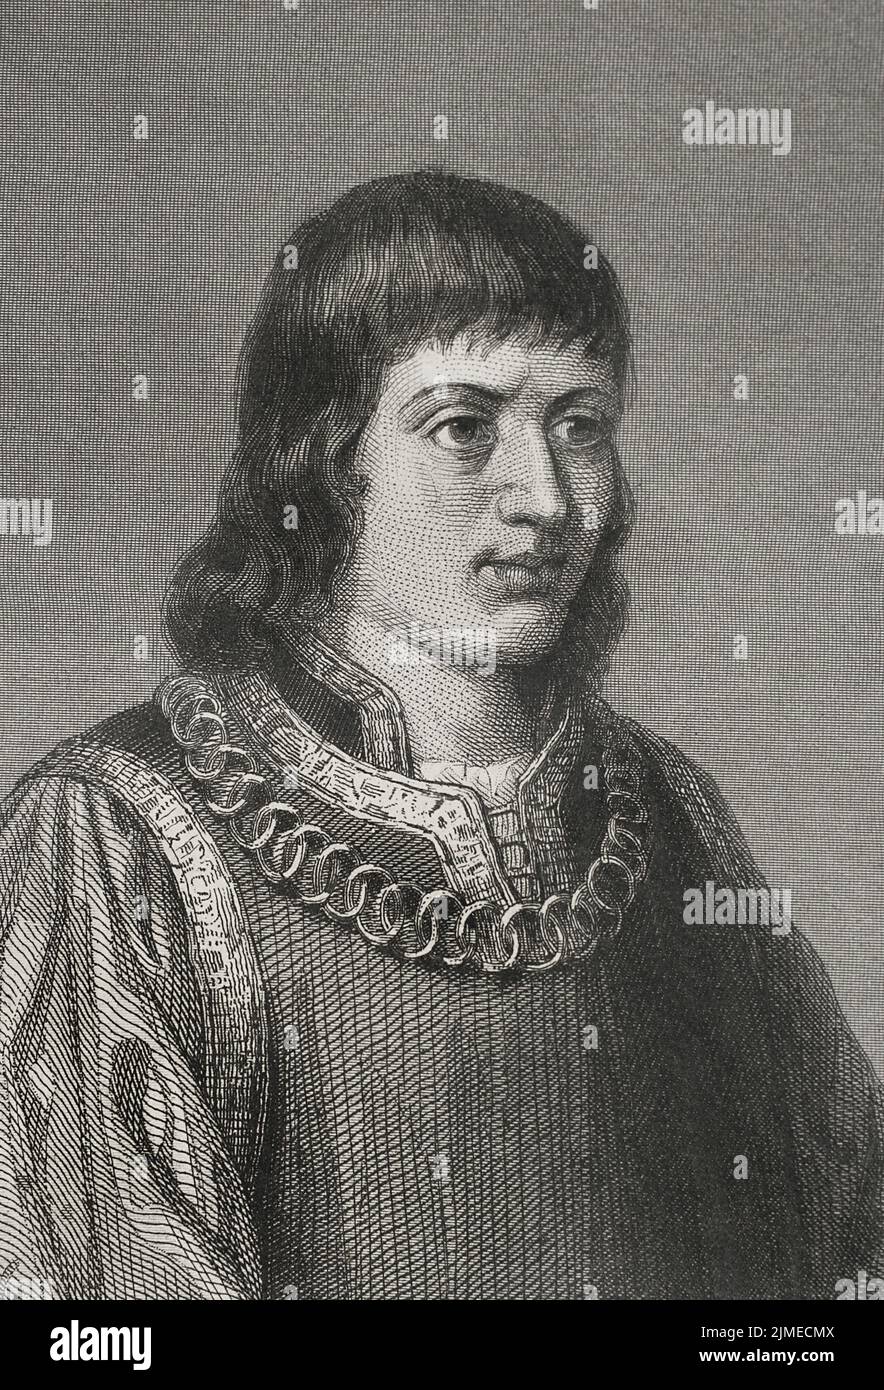 Ferdinand II of Aragon, called The Catholic (1452-1516). King of the Crown of Aragon. King of Castile as Ferdinand V (1474-1504). Portrait. Engraving by Geoffroy. 'Historia Universal', by César Cantú. Volume IV, 1856. Author: Charles Geoffroy (1819-1882). French engraver. Stock Photo